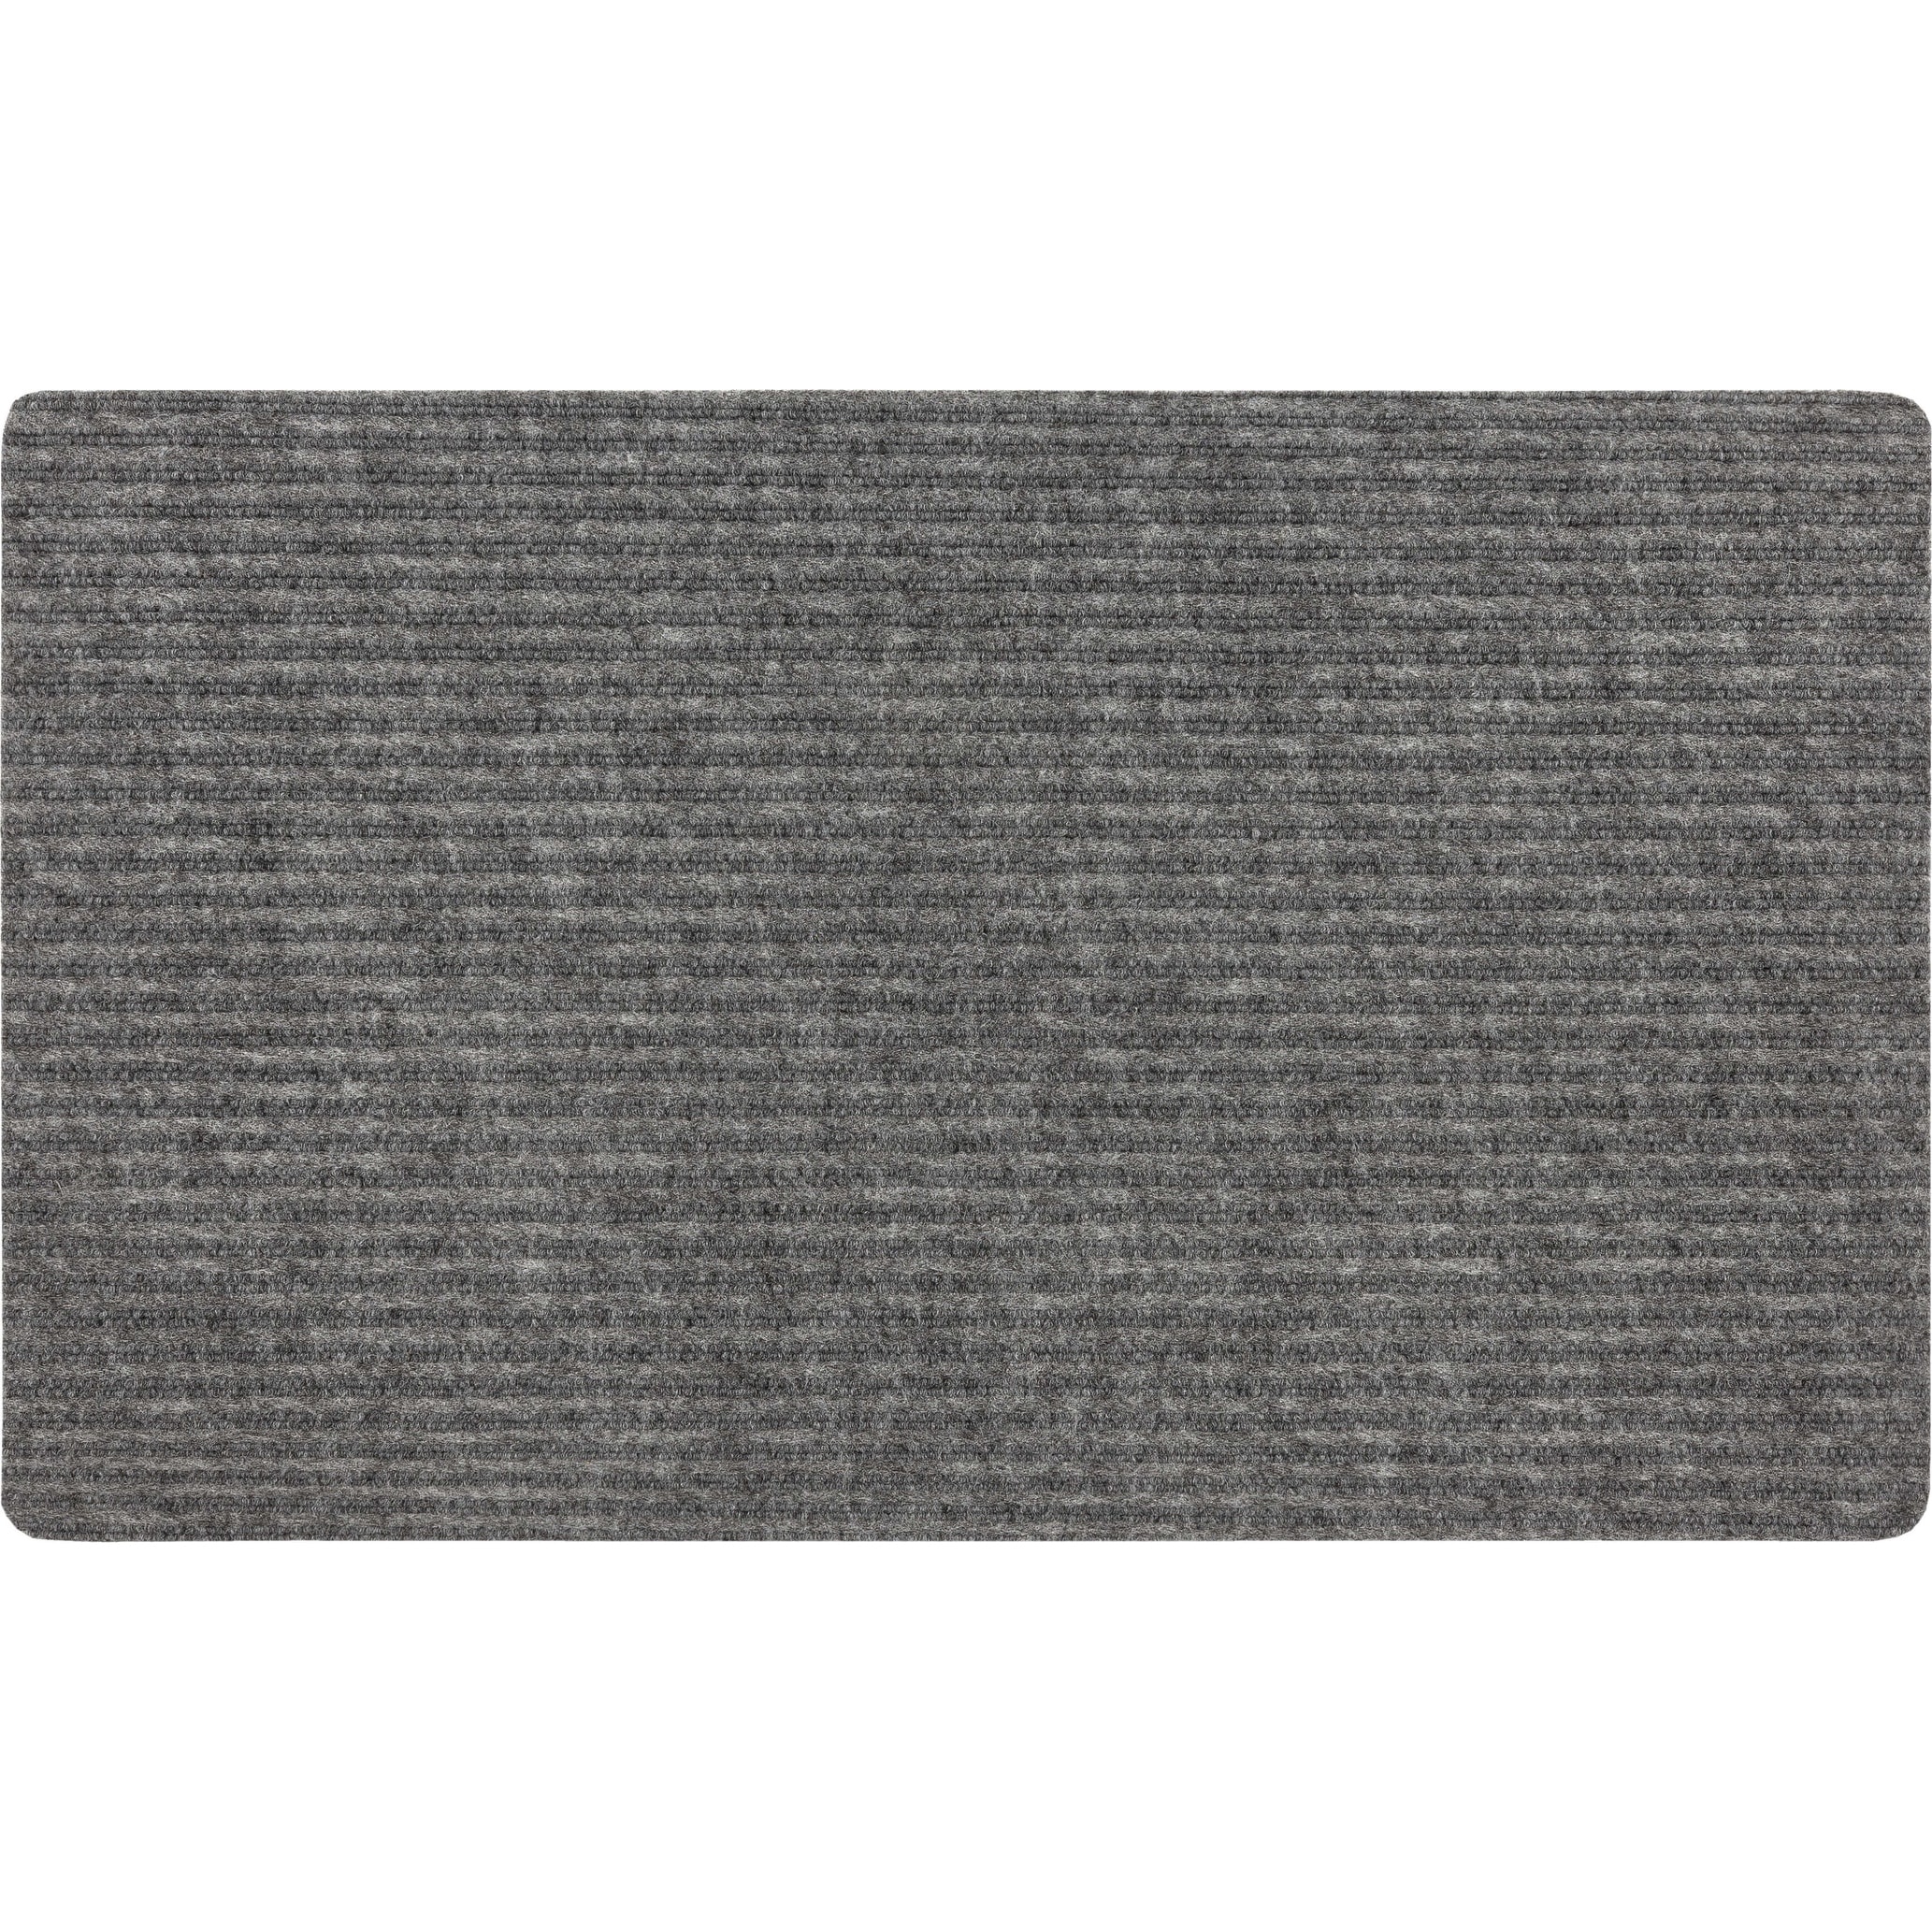 https://ak1.ostkcdn.com/images/products/is/images/direct/1d1b08cfb255bd2d2fc09b98eb30540a367ec13f/Mohawk-Home-Utility-Floor-Mat-for-Garage%2C-Entryway%2C-Porch%2C-and-Laundry-Room.jpg